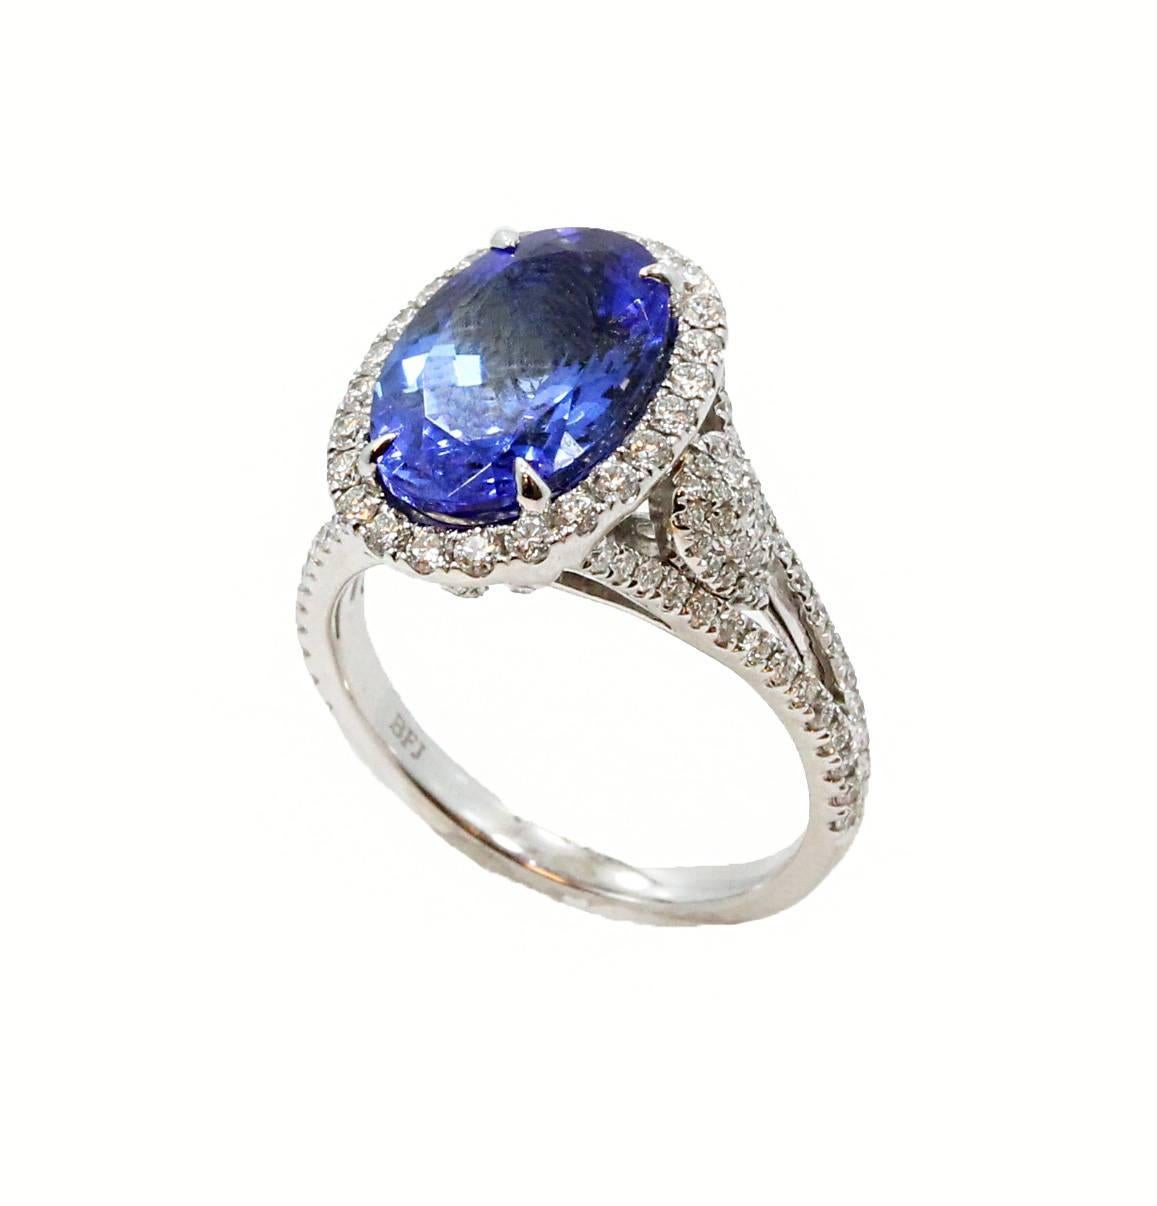 18K White Gold Ring With Center Tanzanite Oval Stone Weighing 4.79ct and Diamonds Weighing .35ct In a Size 6.5